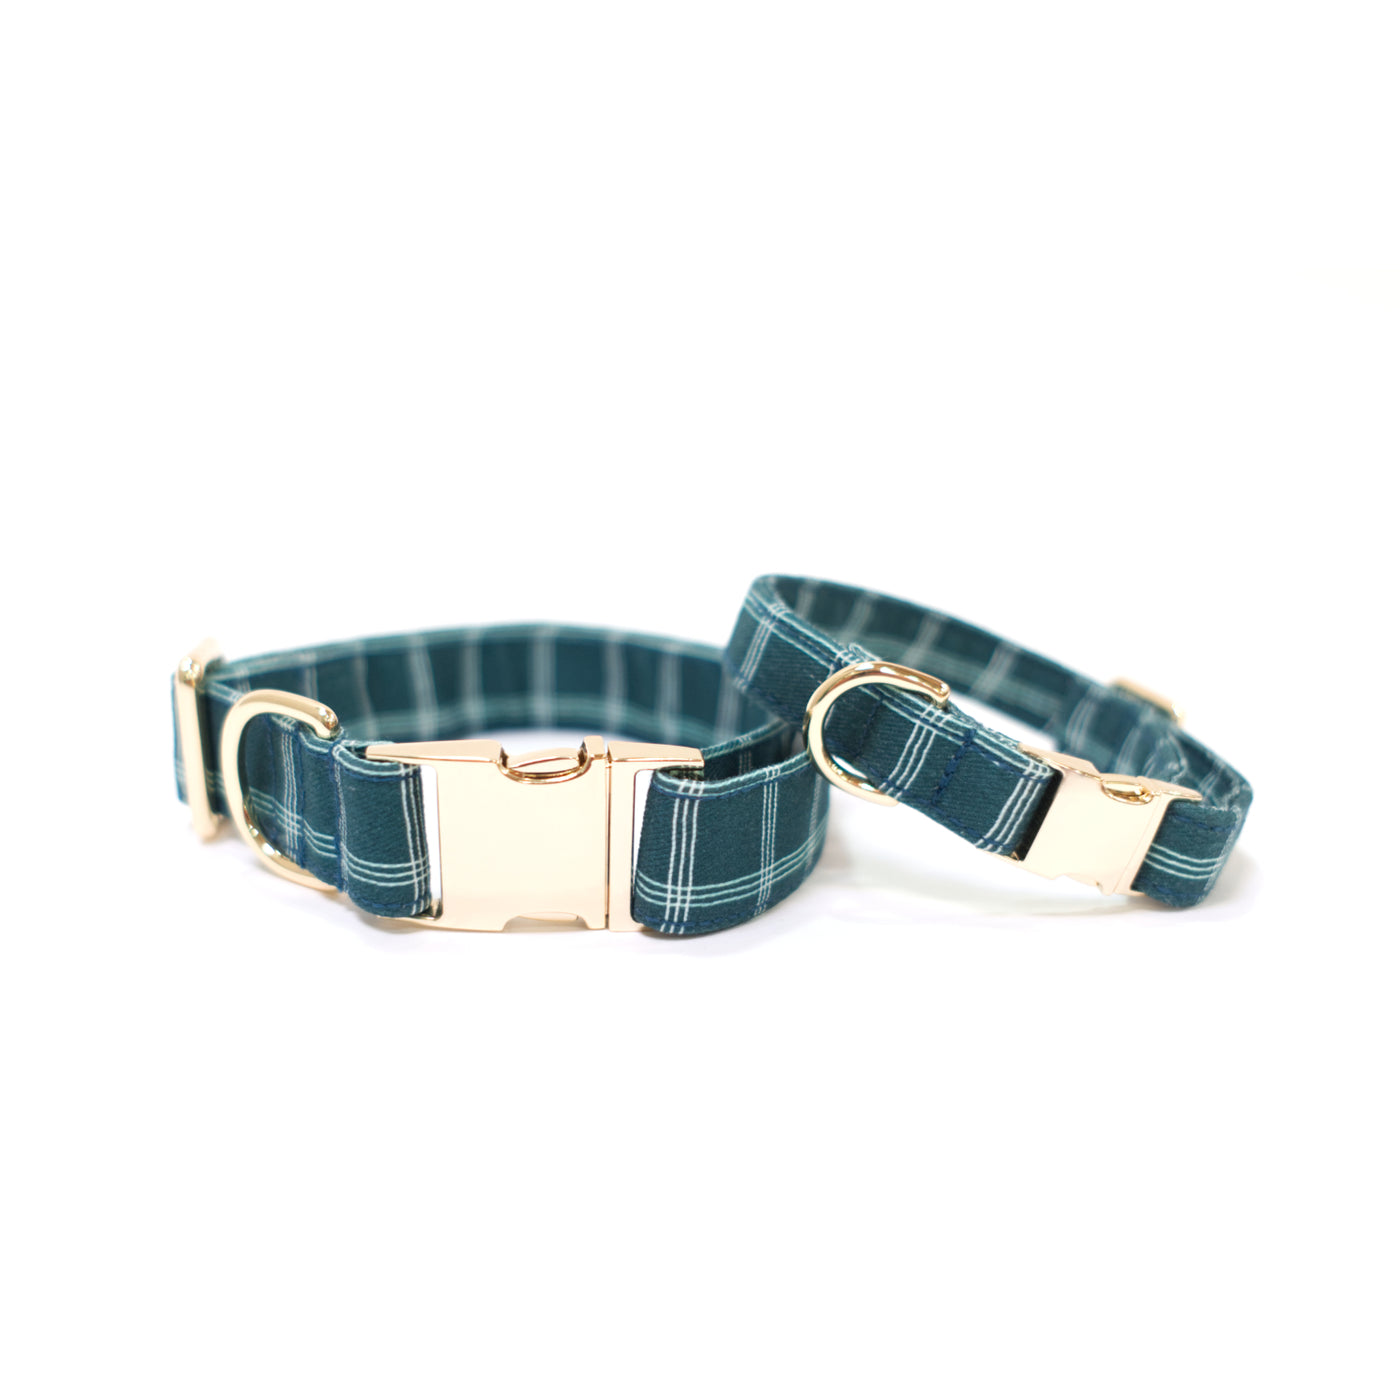 Dark teal windowpane plaid dog collar with gold hardware shown in two sizes